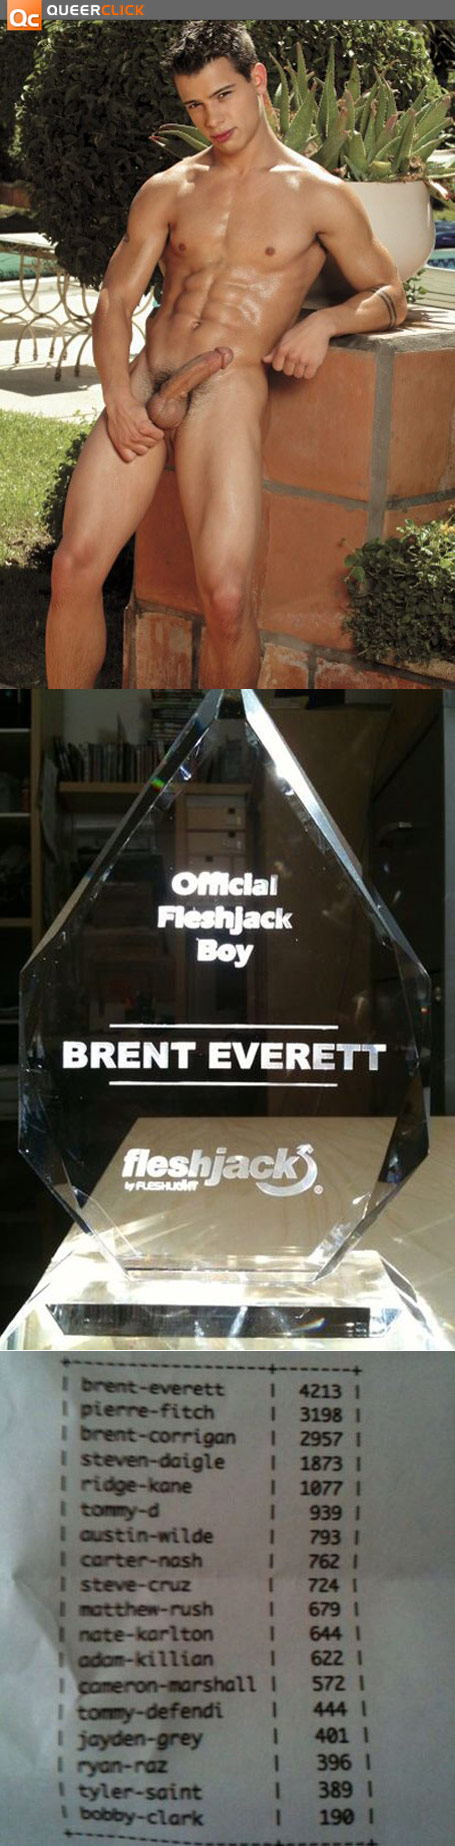 Brent Everett Shows Off His Trophy (From Fleshjack) And Their Winner Vote Totals